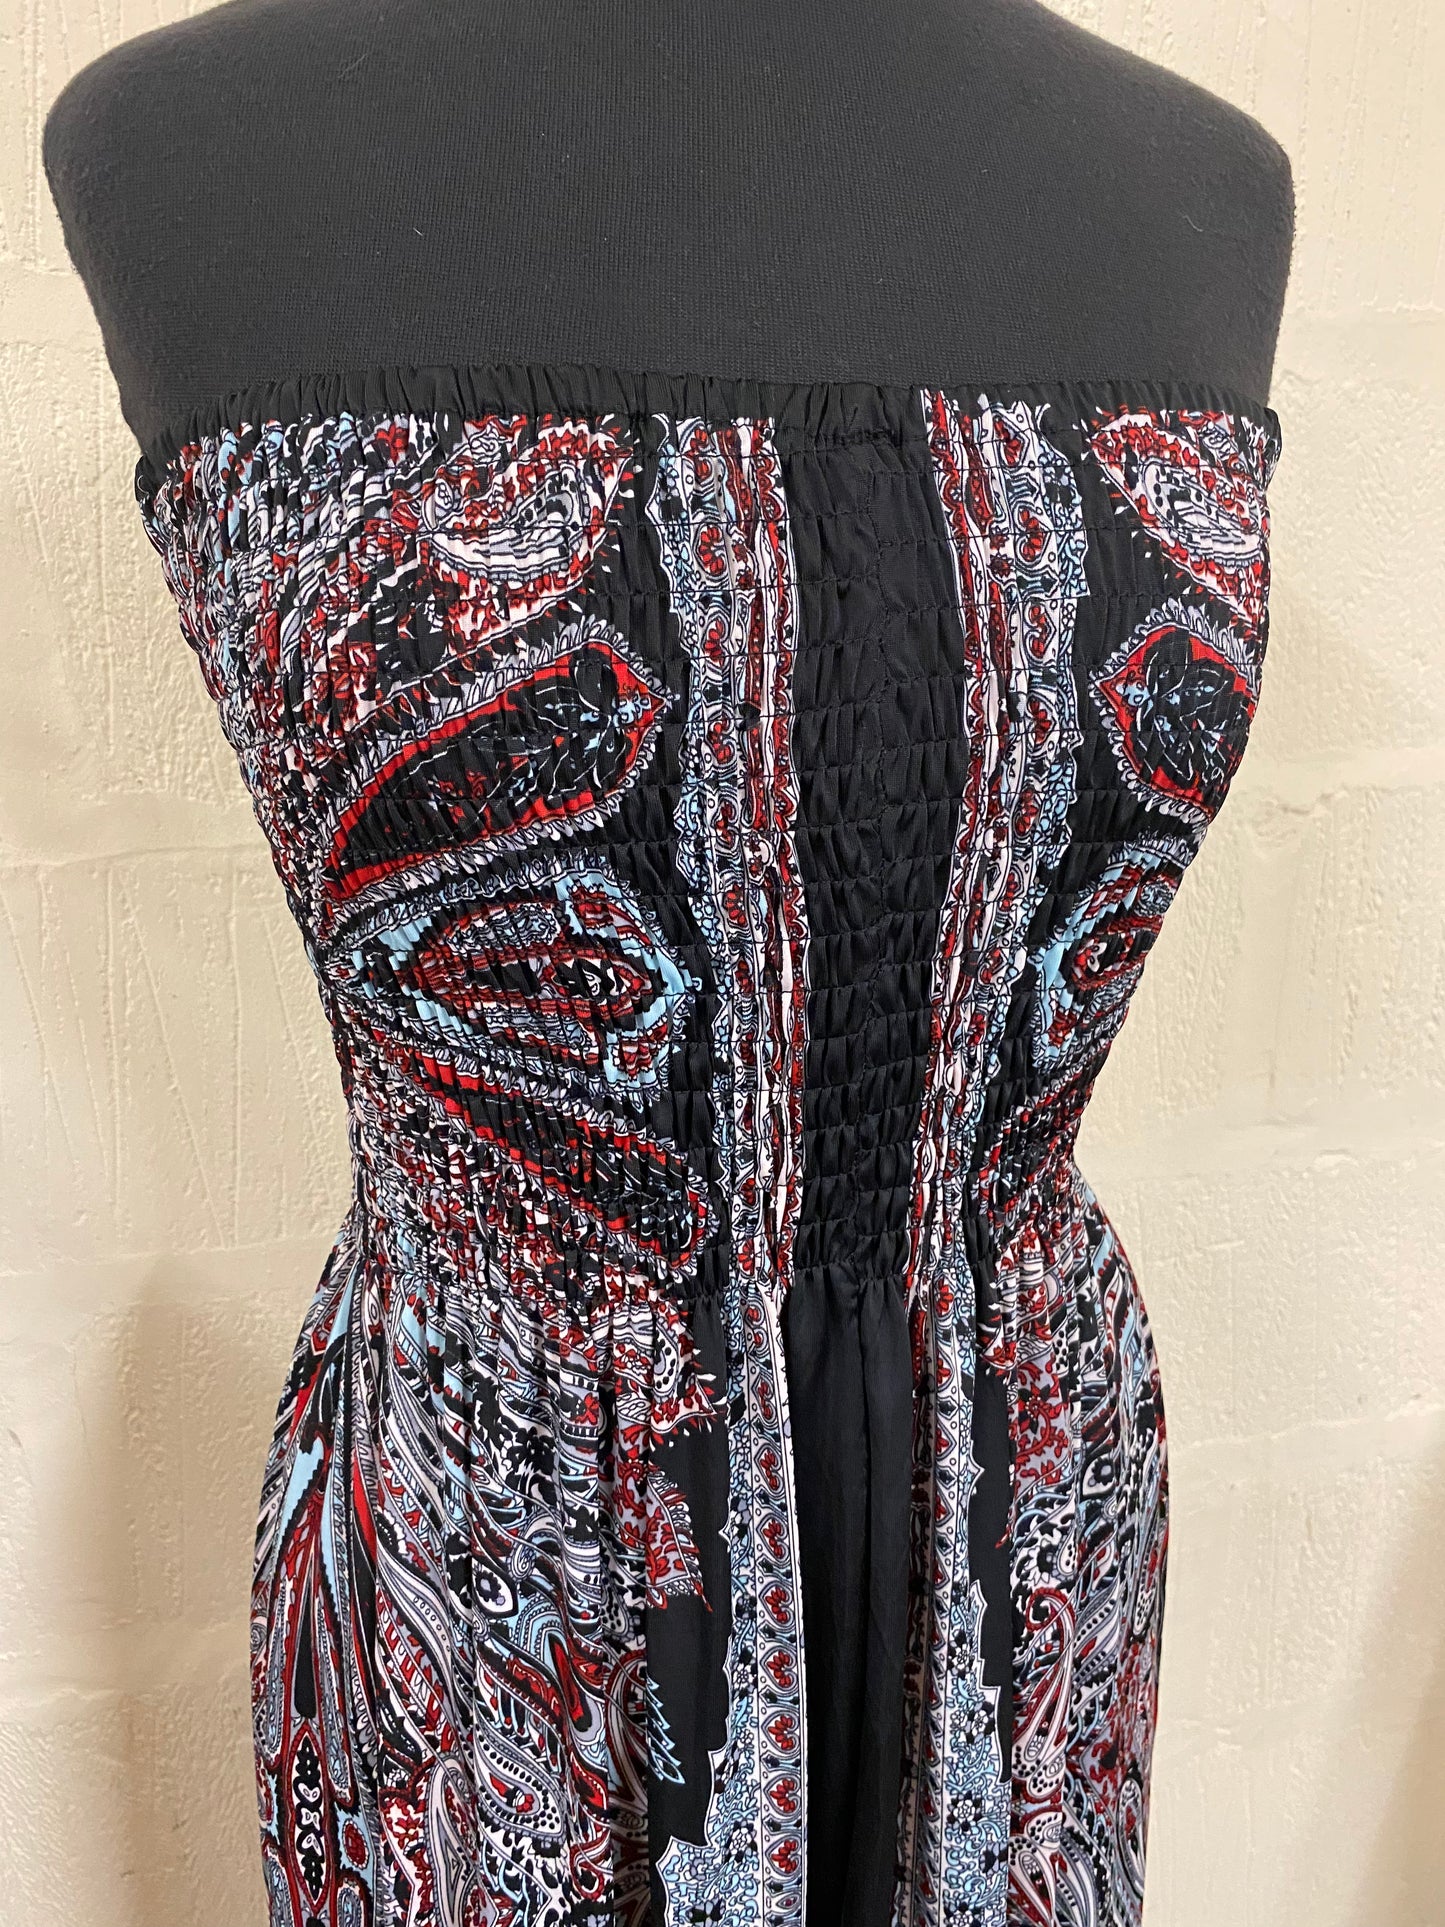 Noughties Black and Red Printed Maxi Sun Dress Size 10 10